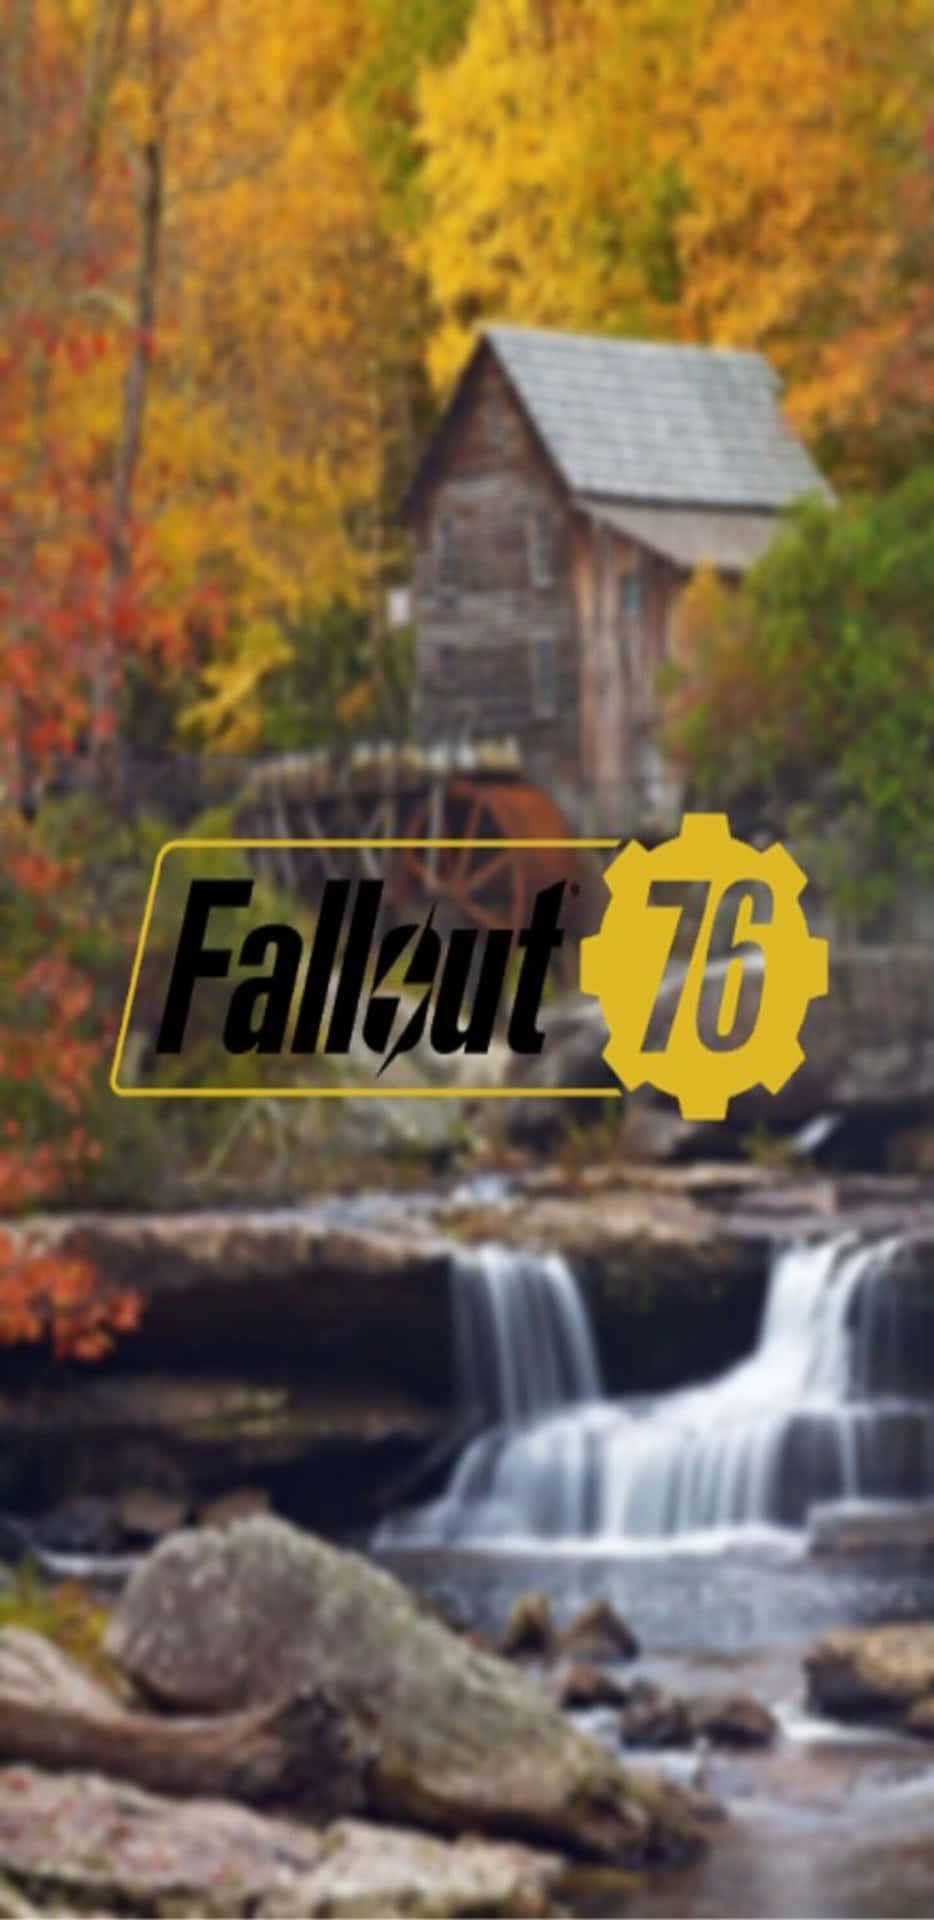 Historic Warfare Comes to Life with Pixel 3XL at Fallout 76